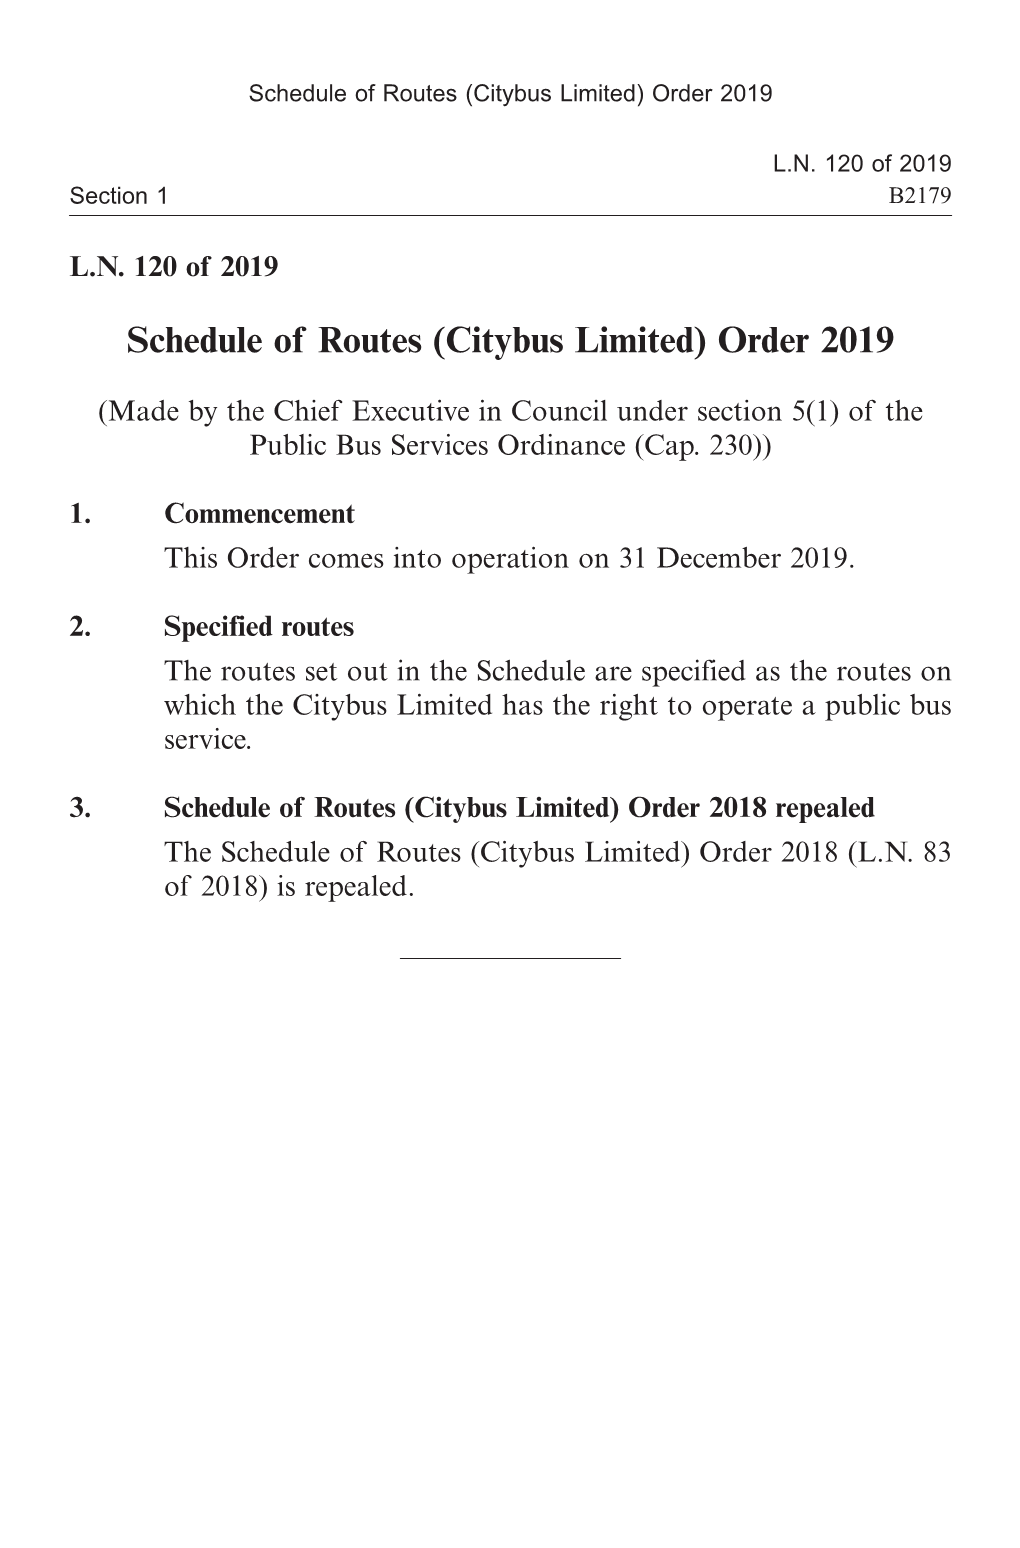 Schedule of Routes (Citybus Limited) Order 2019